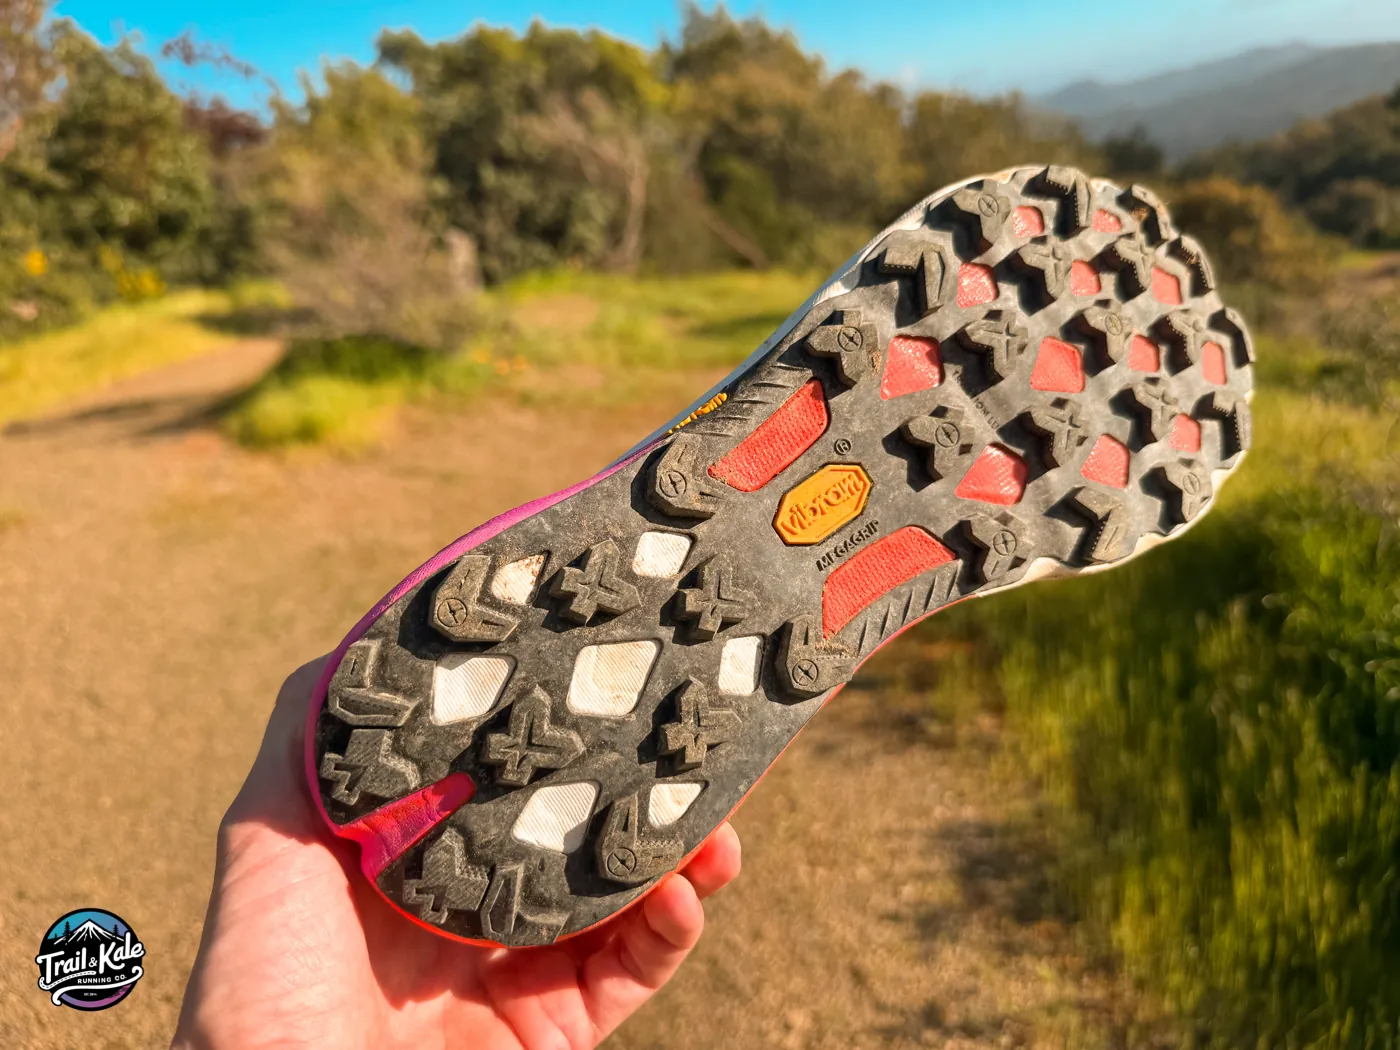 The Megagrip outsole with its sexy 5mm traction lugs